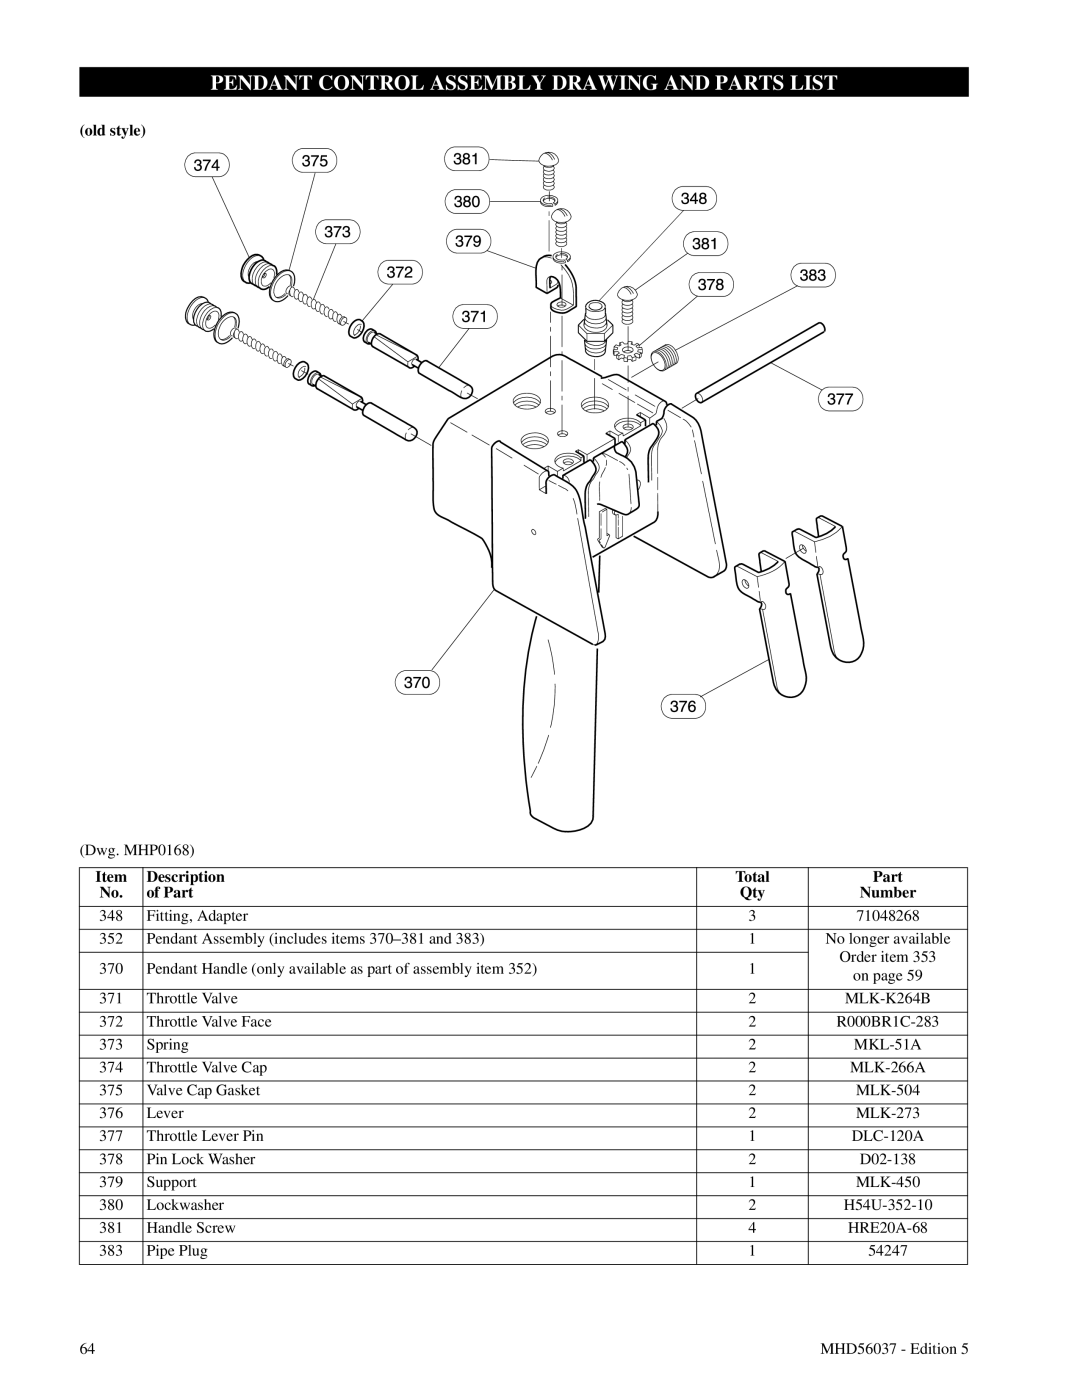 Ingersoll-Rand FA5T manual Pendant Control Assembly Drawing And Parts List, old style, Description, of Part 